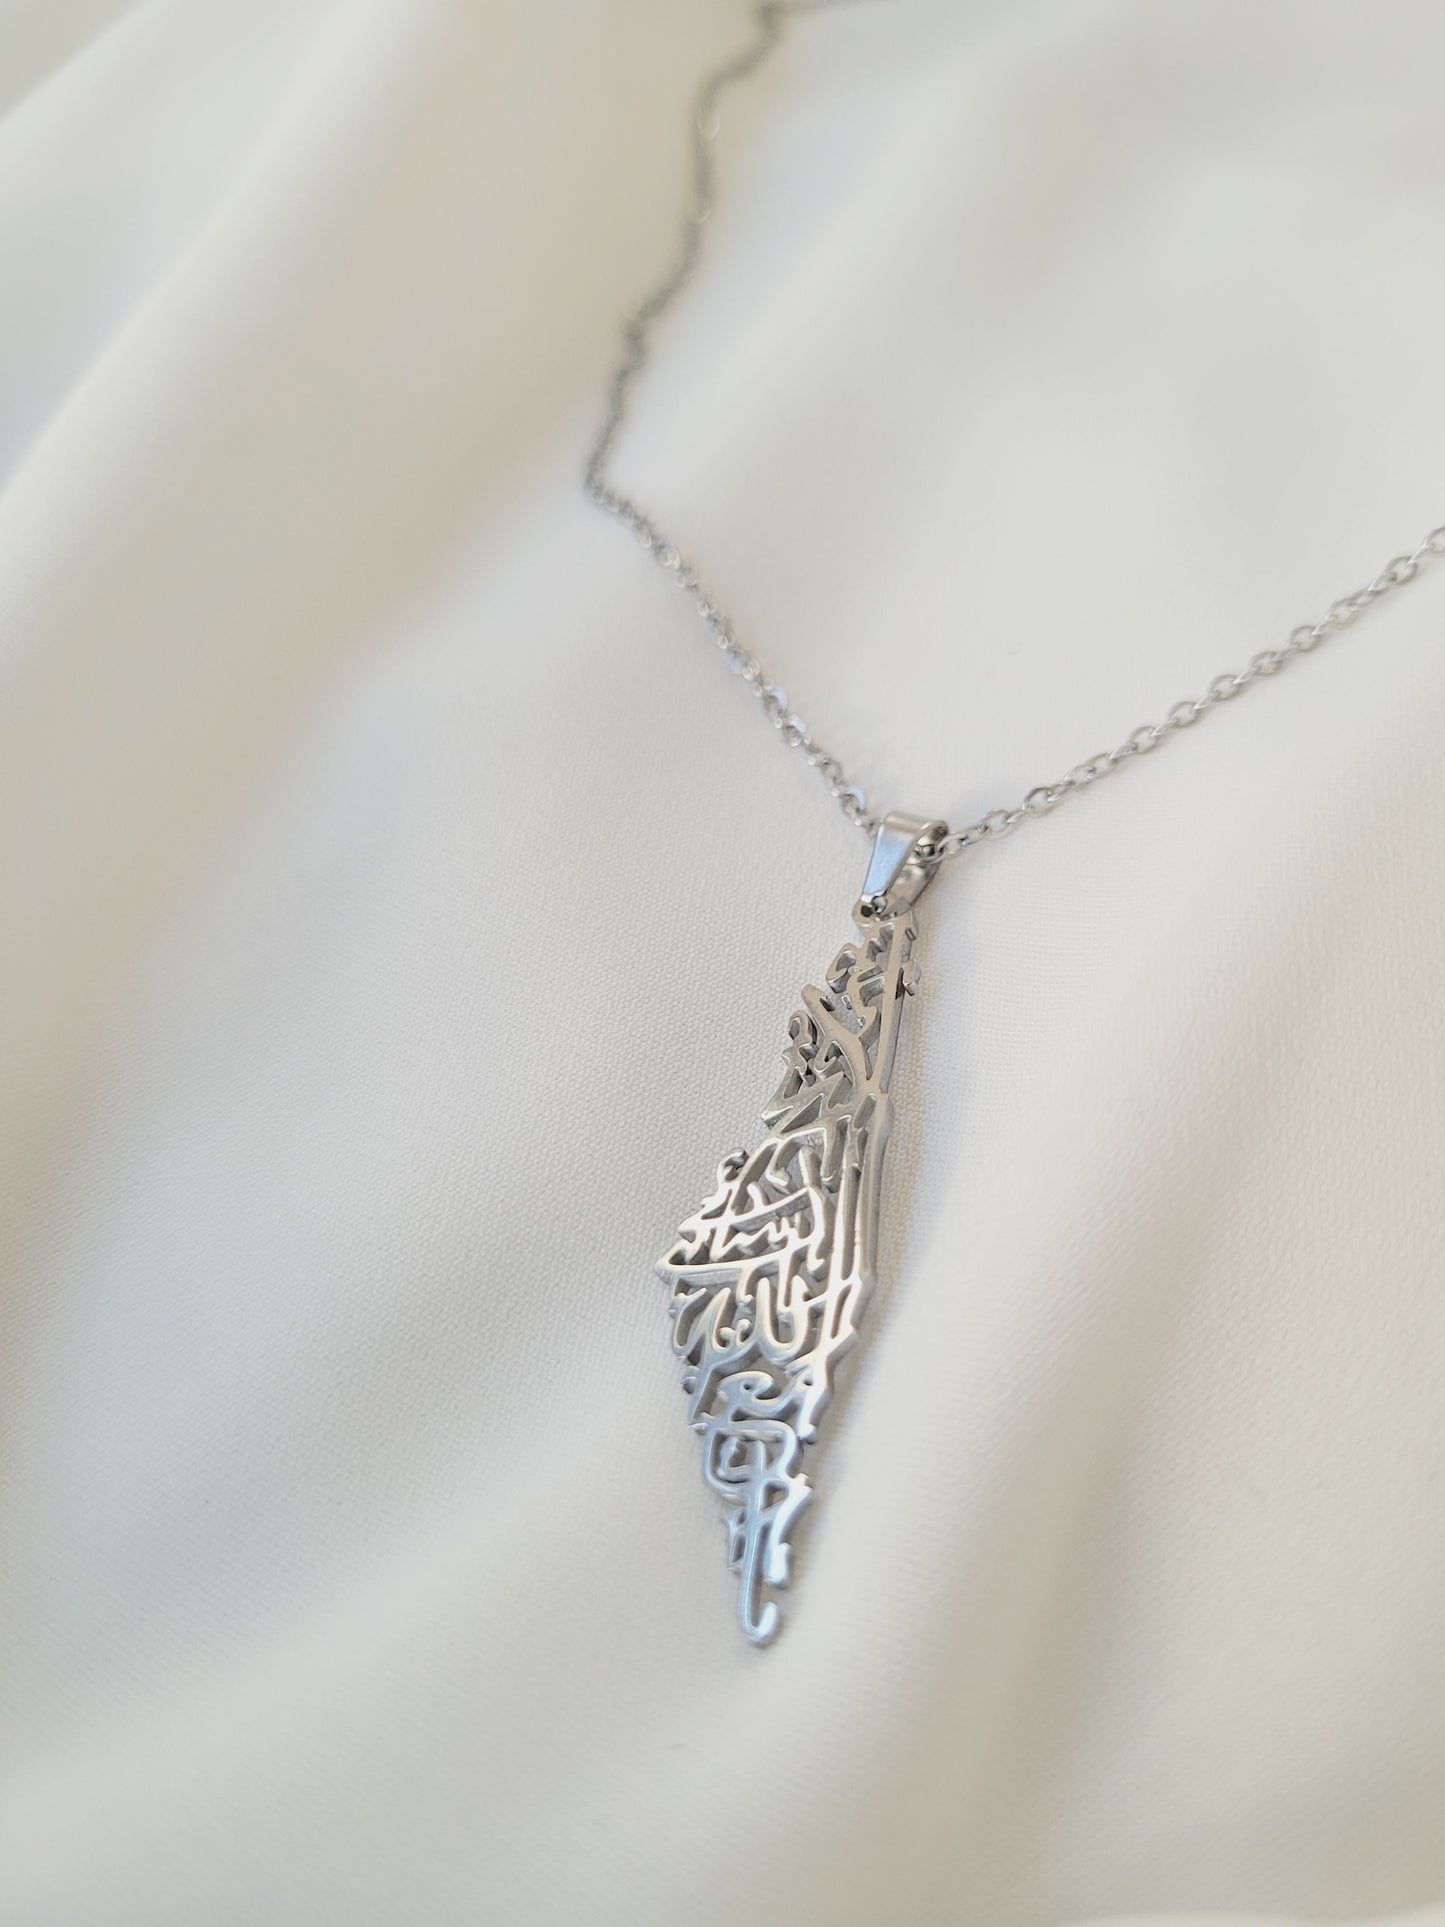 Palestine Necklace with Arabic Text Engraved 🇵🇸 Silver Colour